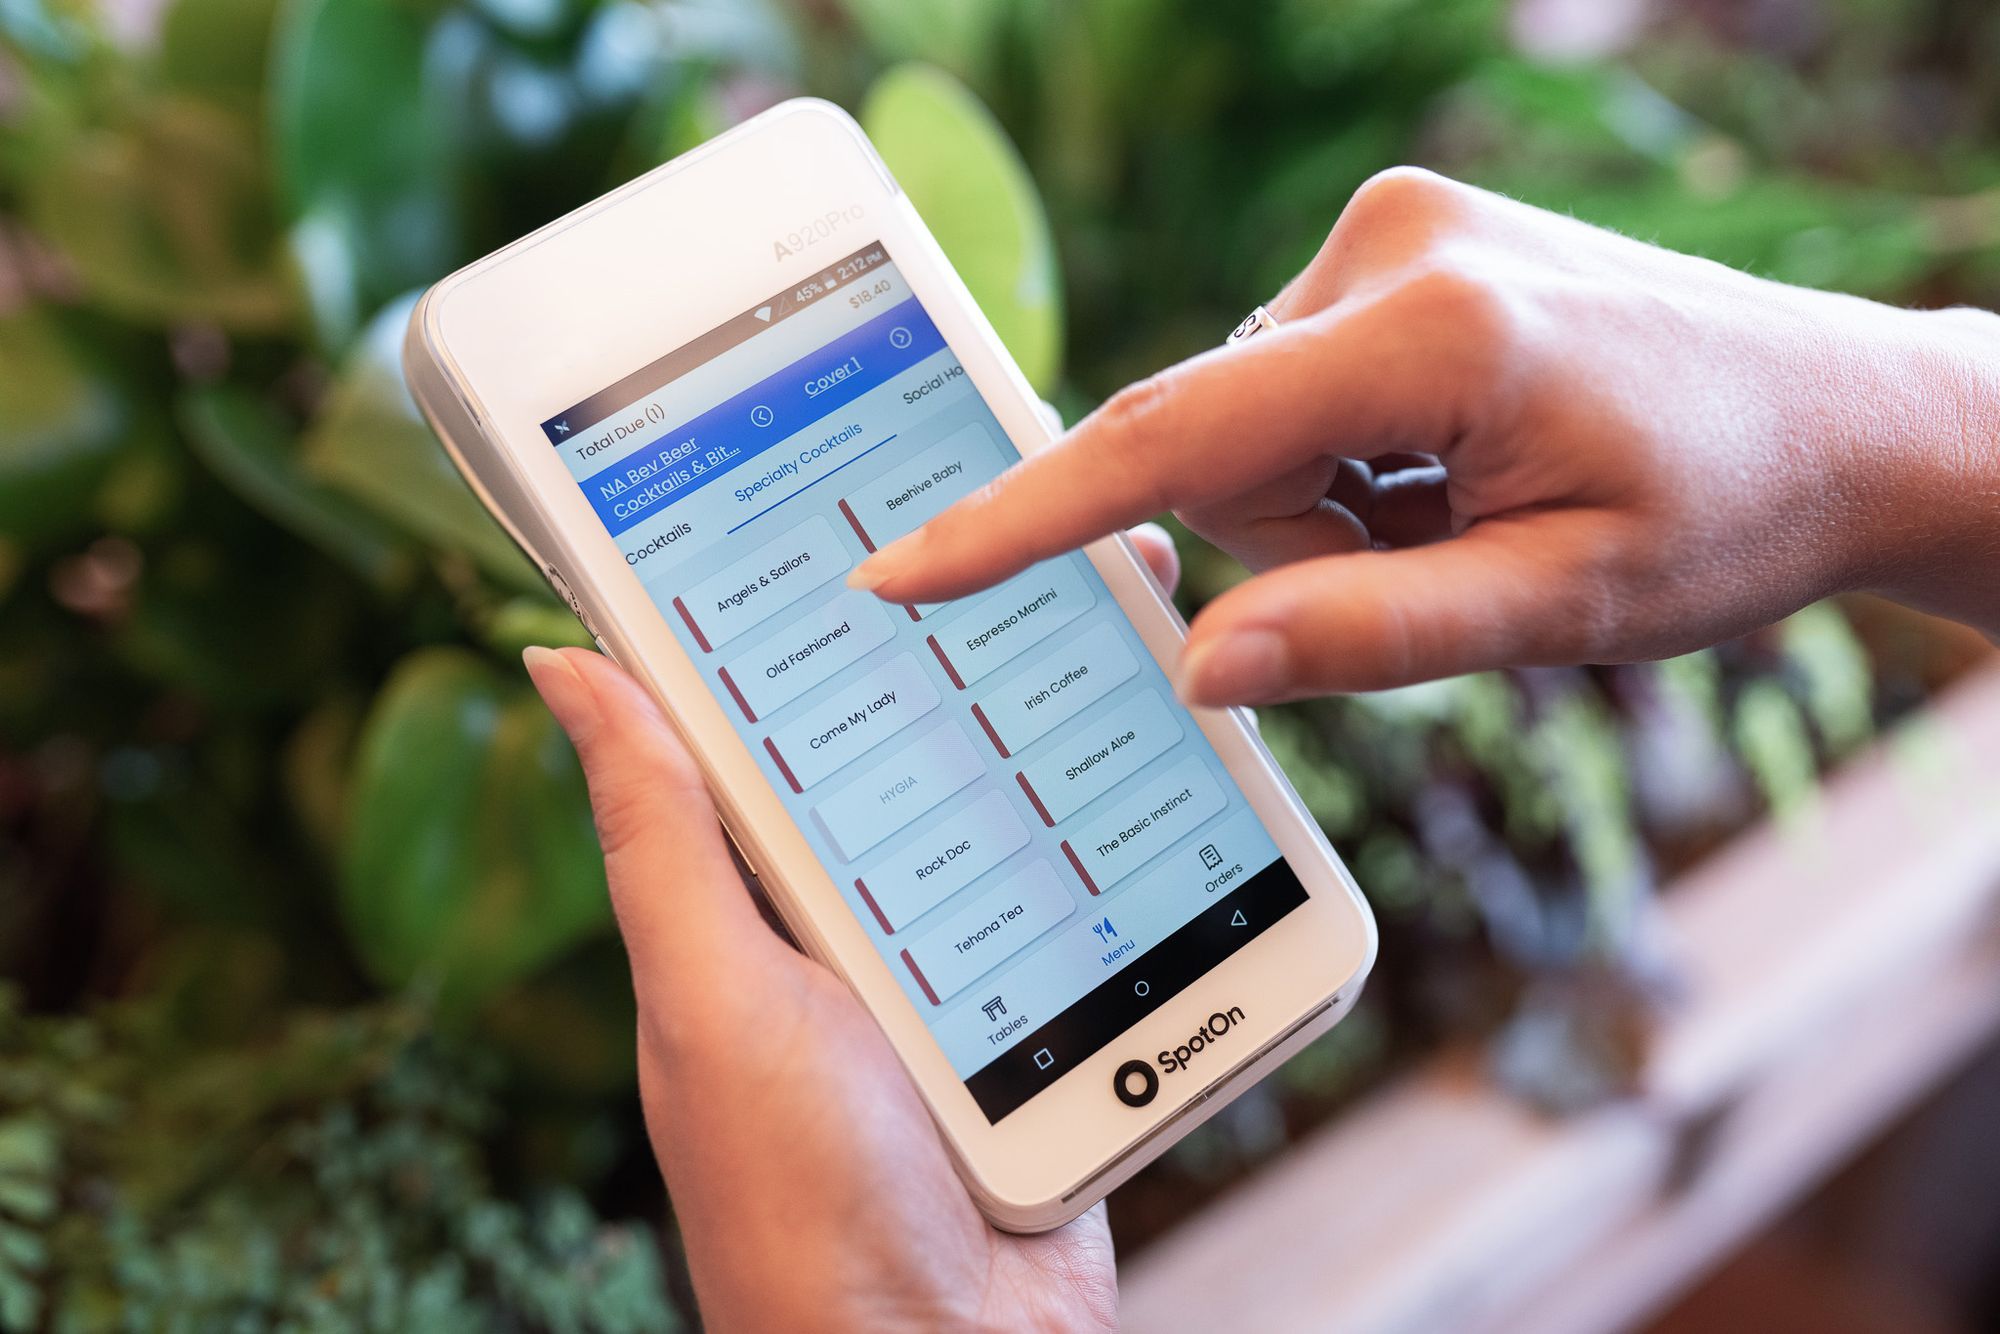 A restaurant server places an order from a handheld POS device